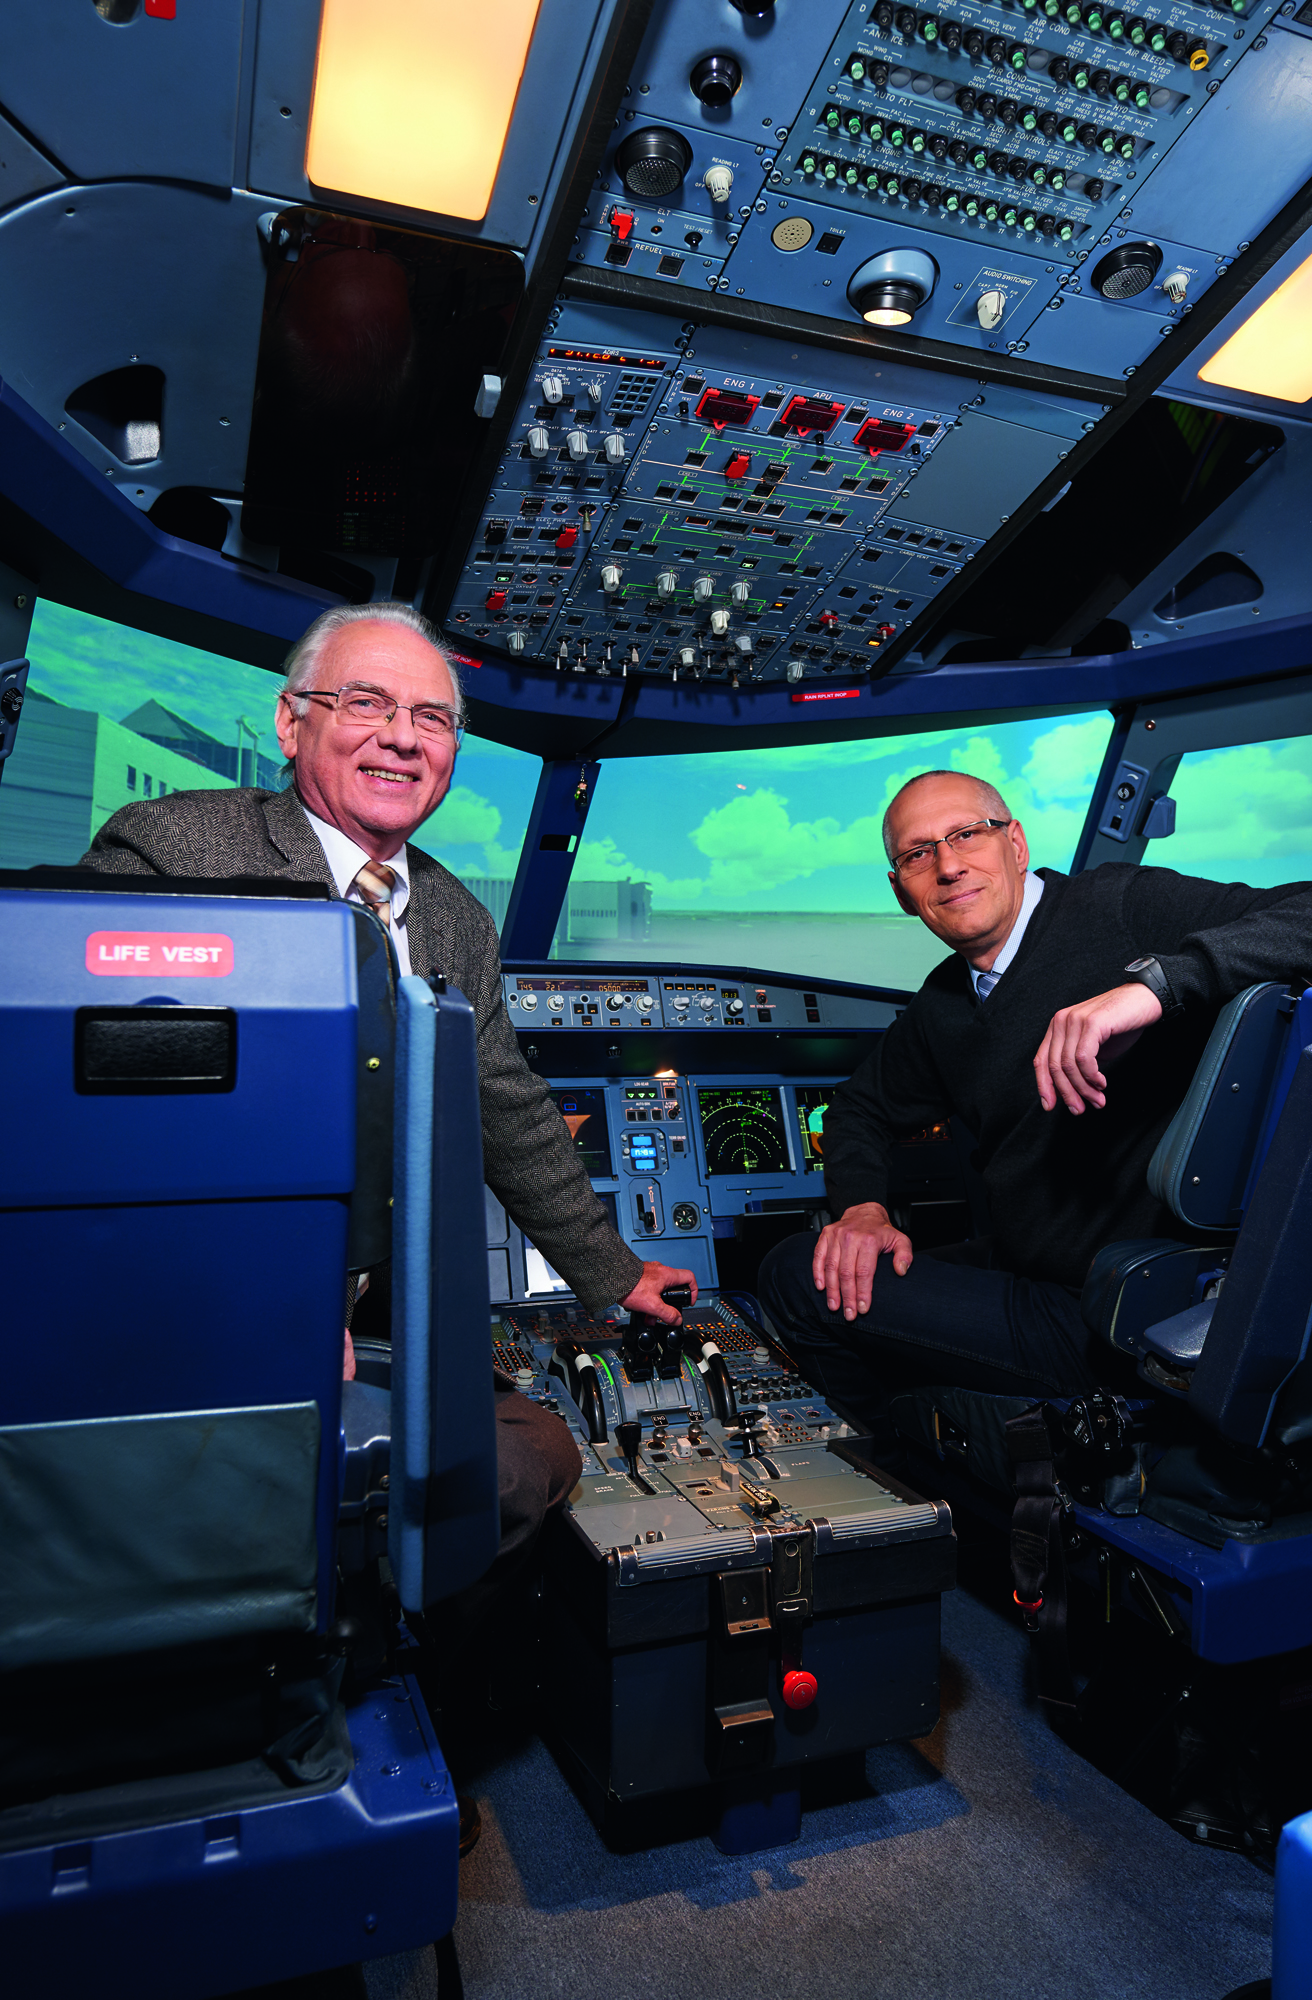 Main research issue of the business unit “Joining“ is the development of innovative technologies for the aircraft industry. Prof. Dr. Berndt Brenner (left) hands over the management of his business field to Dr. Jens Standfuß (right) in January 2015.